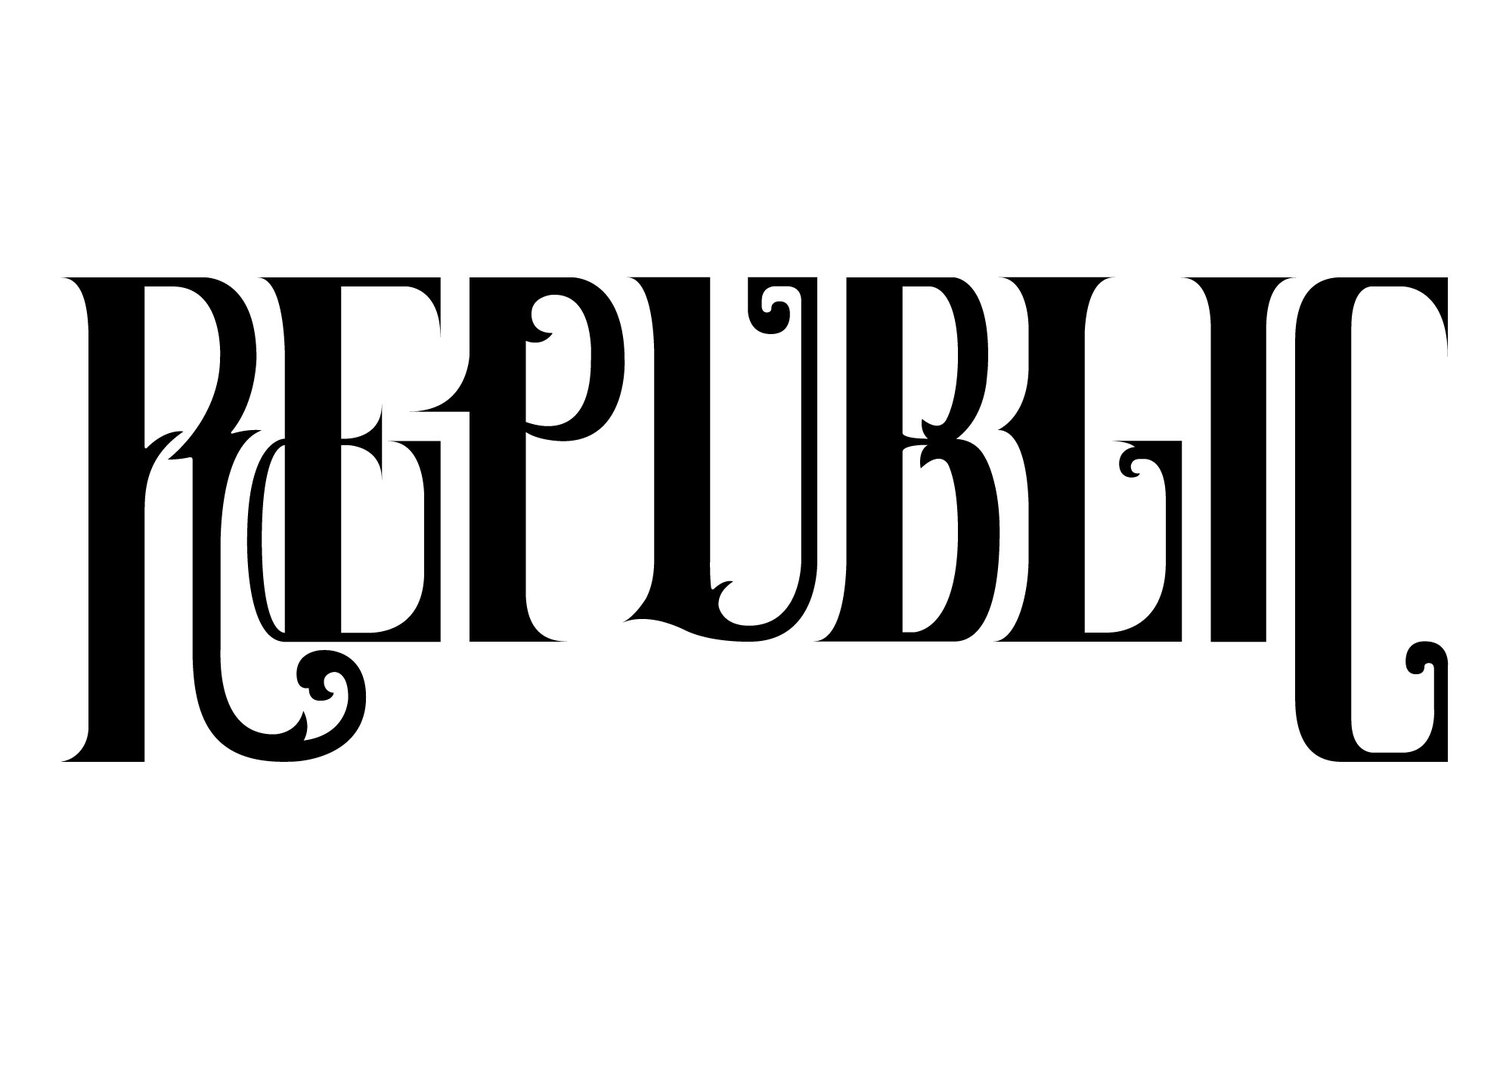 Republic wallpapers, Music, HQ Republic pictures | 4K Wallpapers 2019